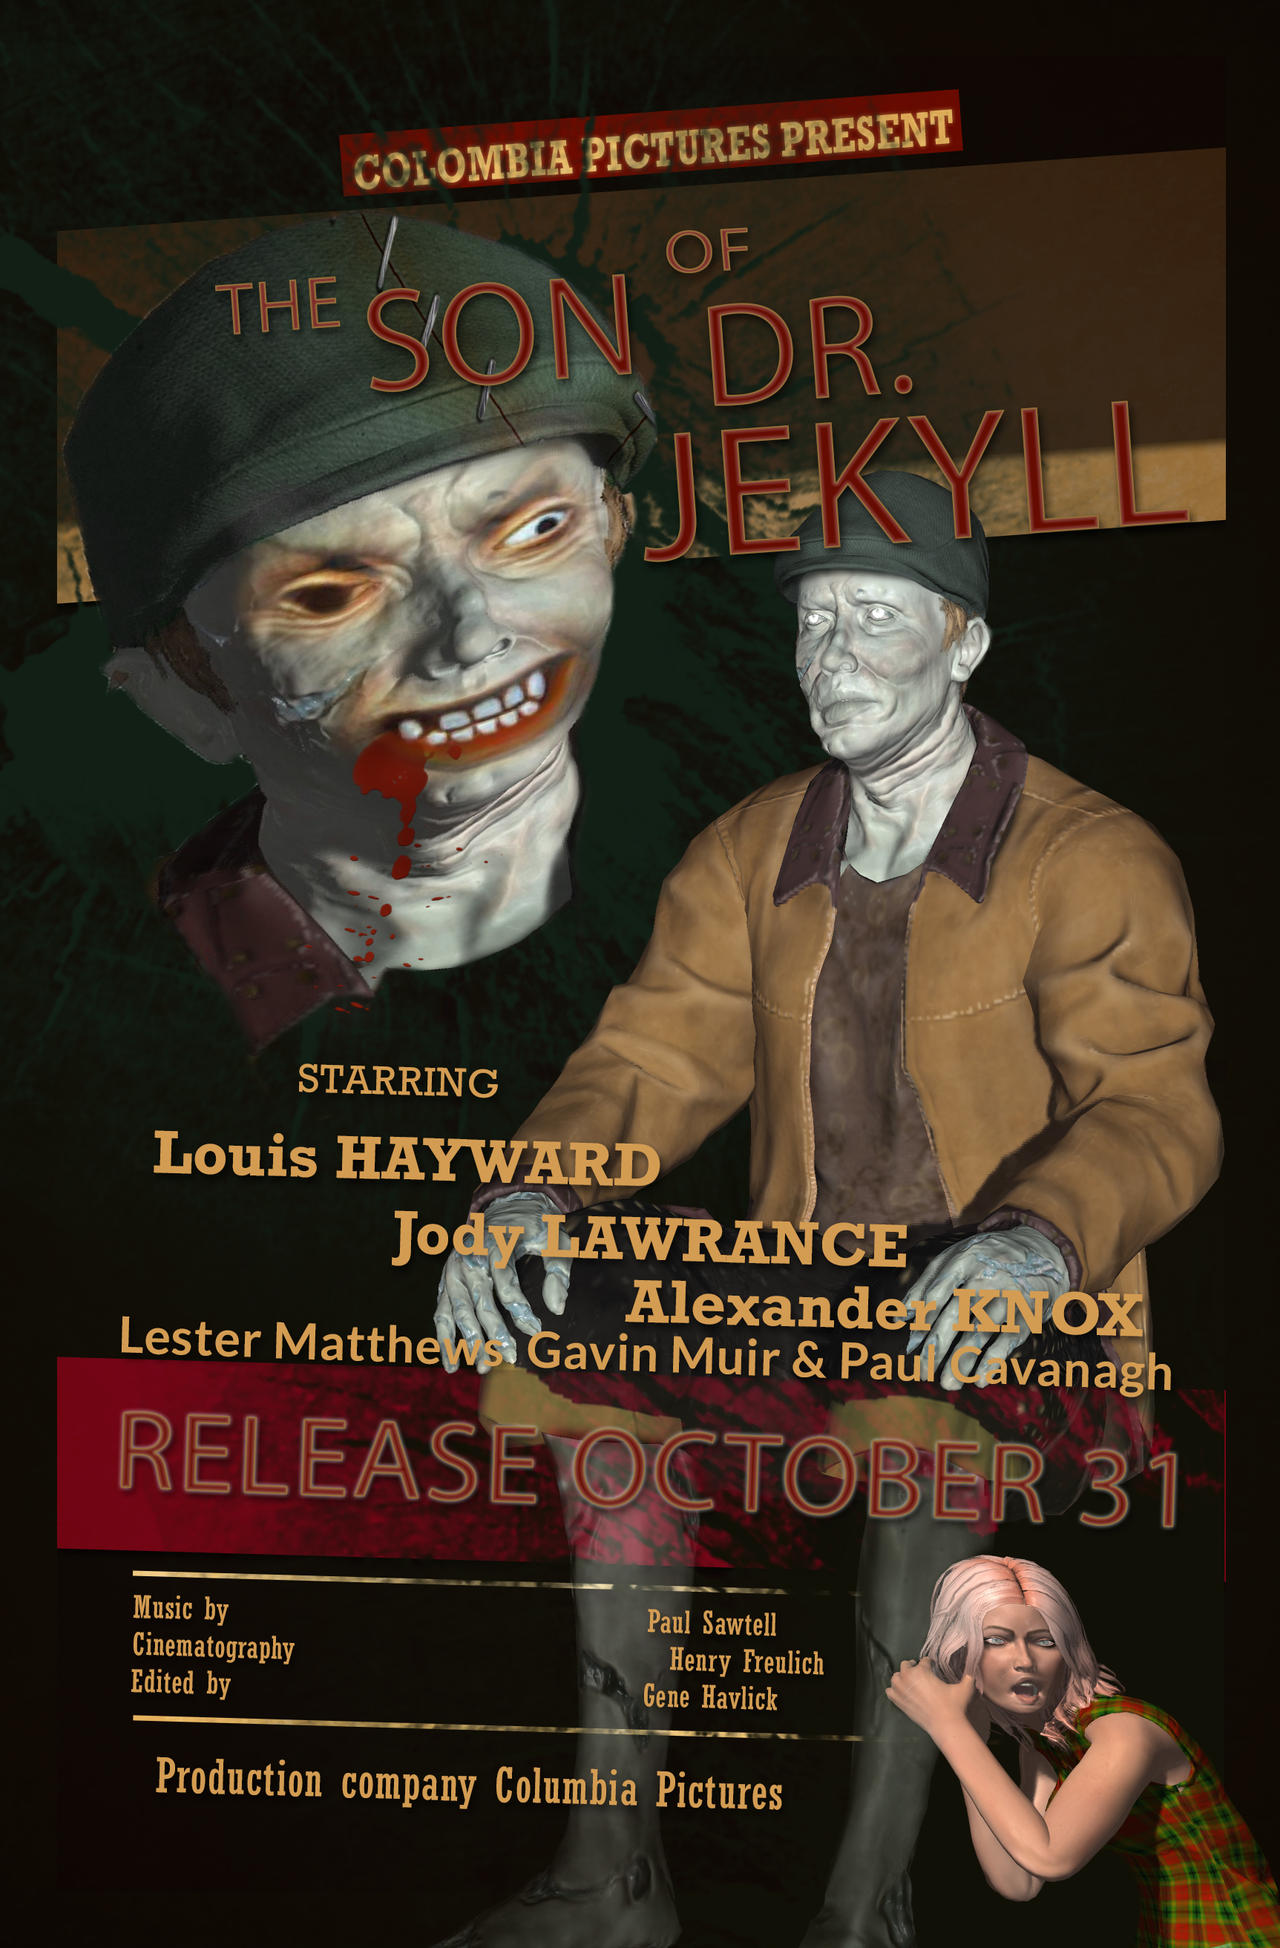 The son of Dr. Jekyll movie poster fifties style